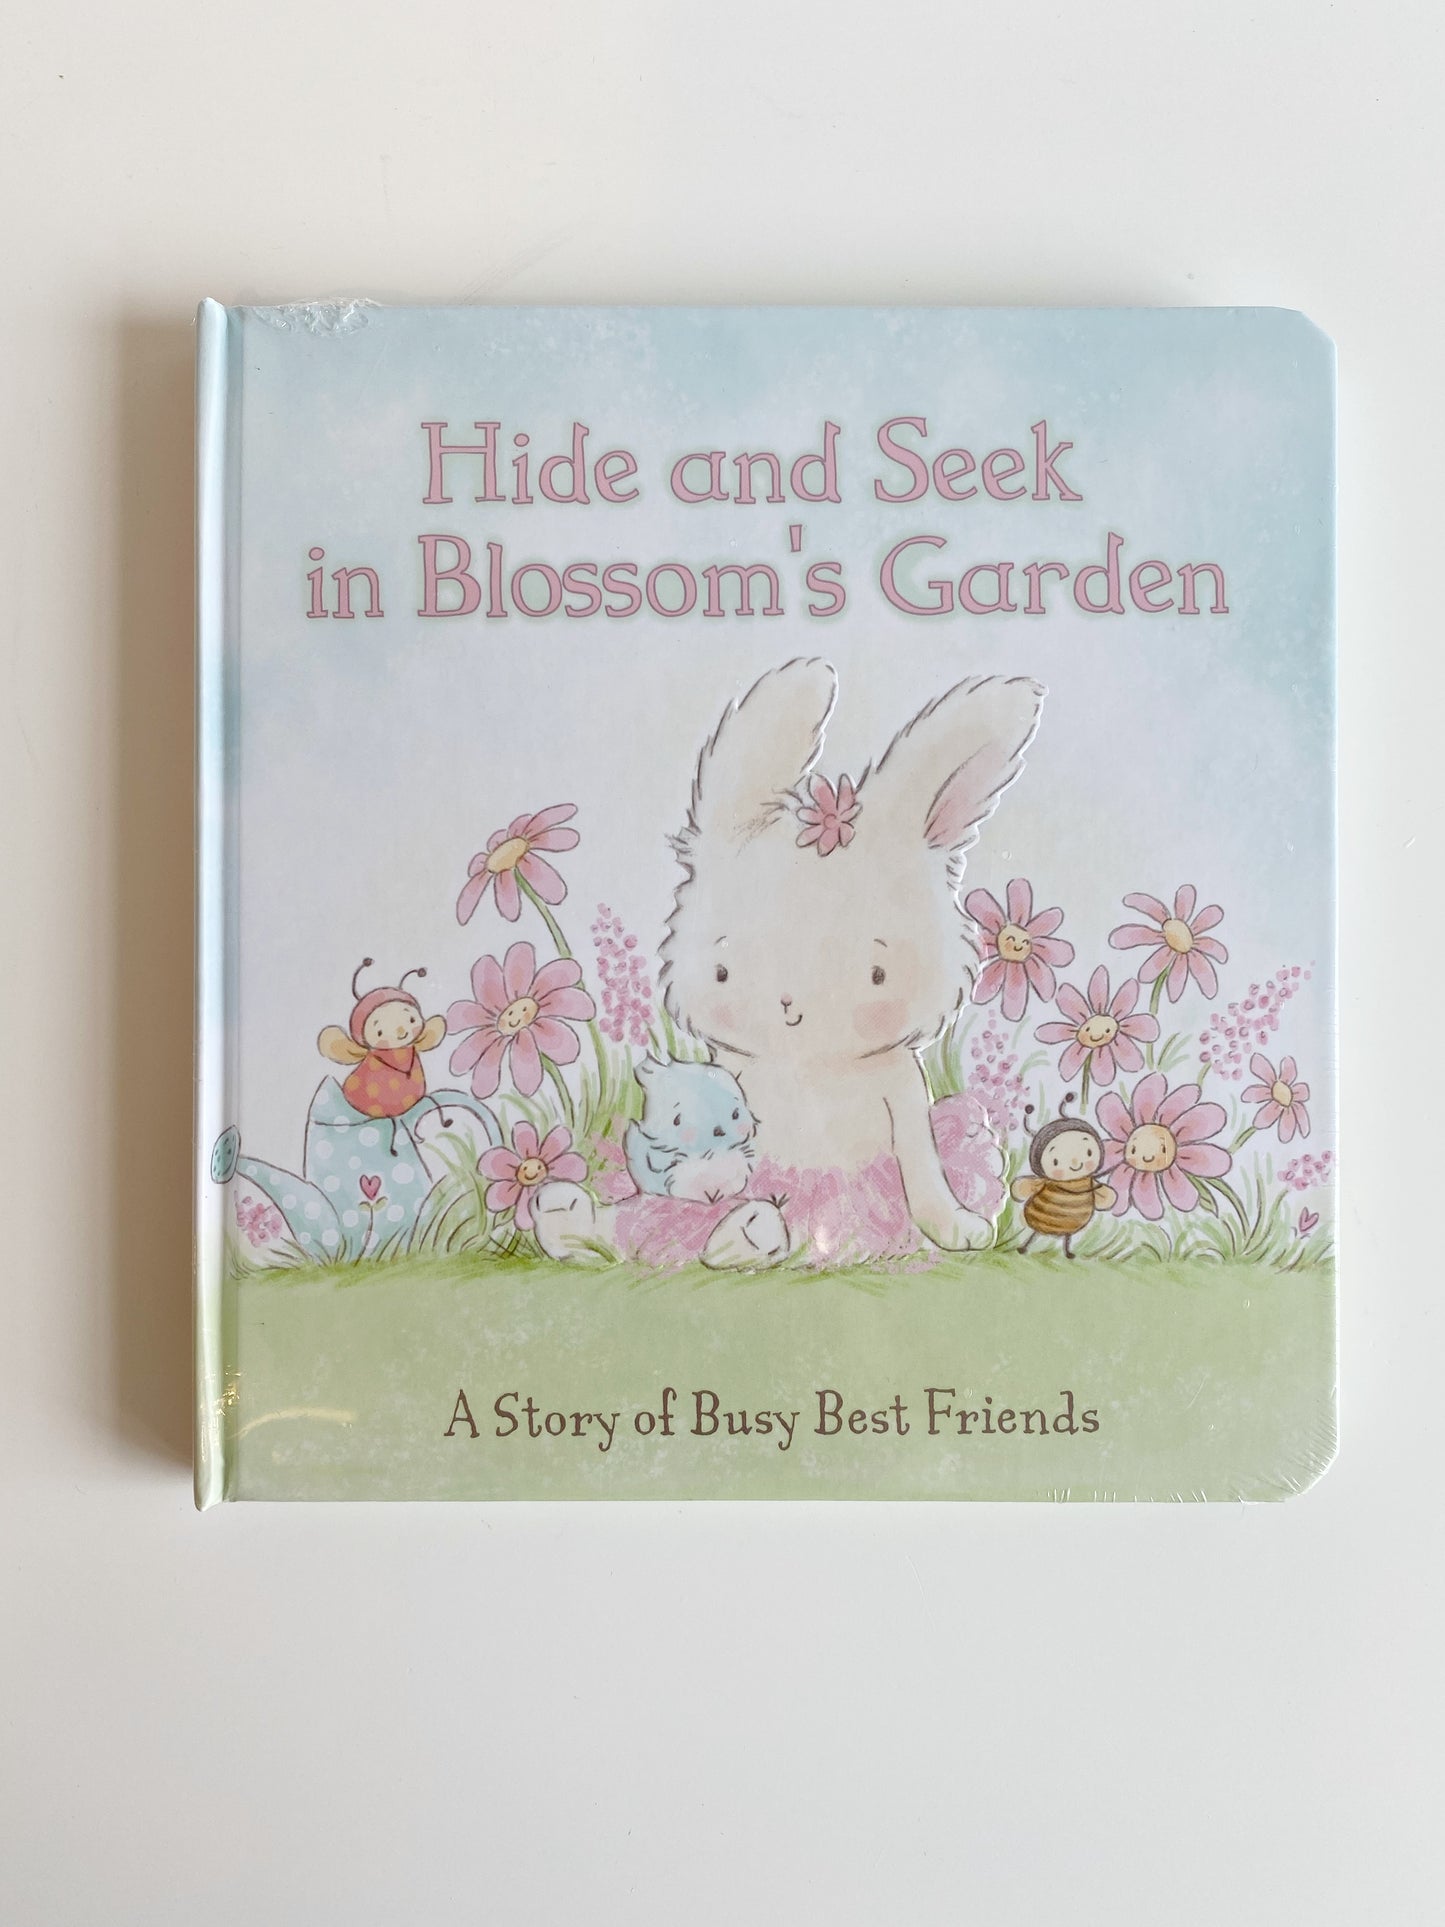 Hide and Seek in Blossom’s Garden. A Story of busy best friends.